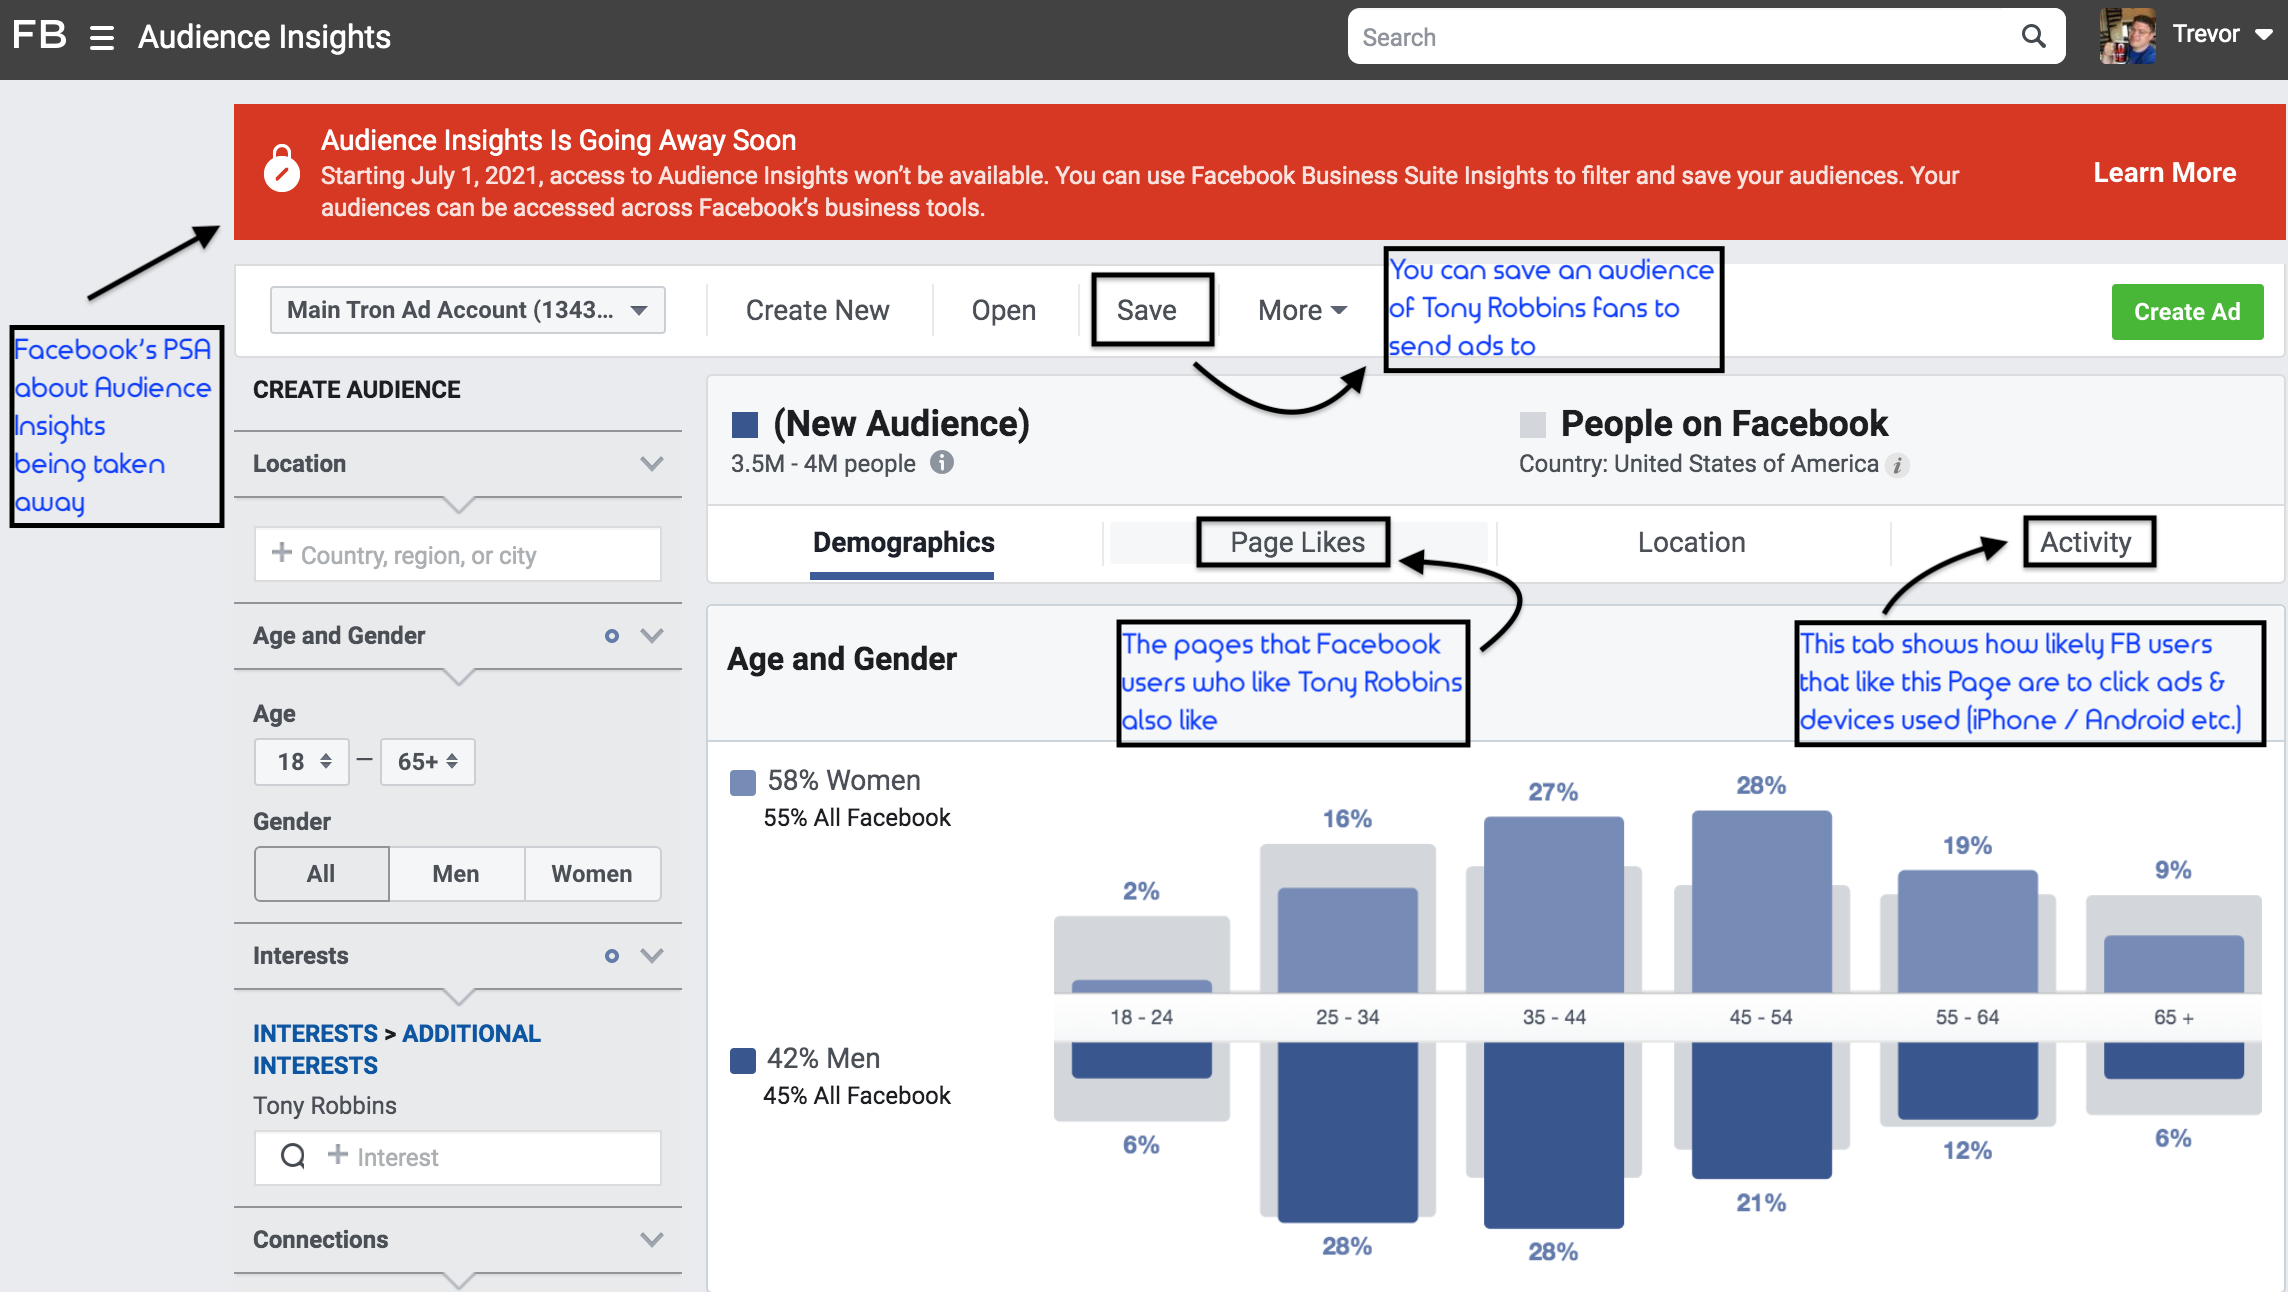 Facebook audience insight tool was an amazing tool for creators.